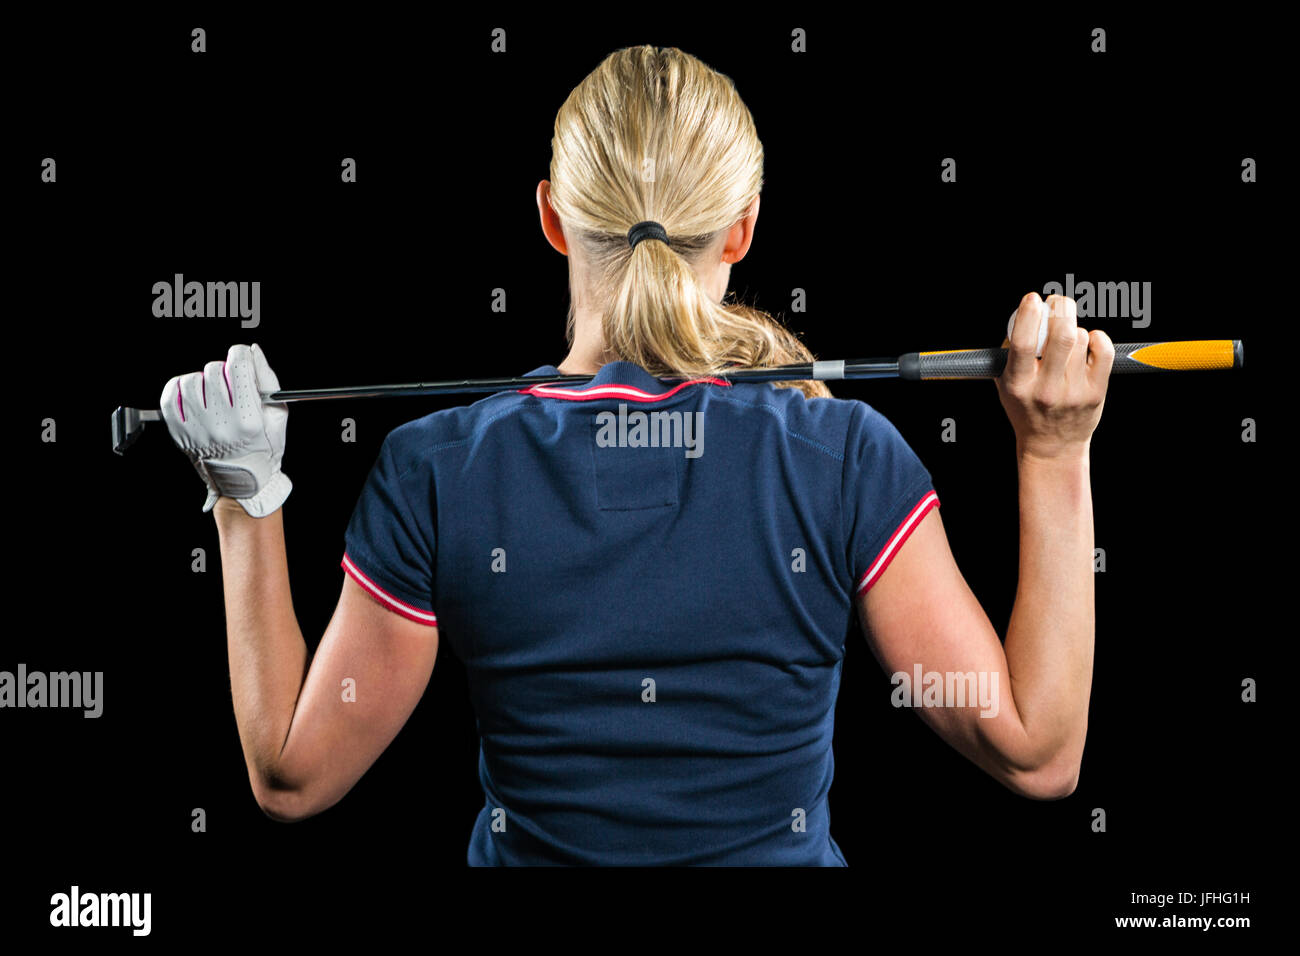 Rear view of golf player holding a golf club Stock Photo